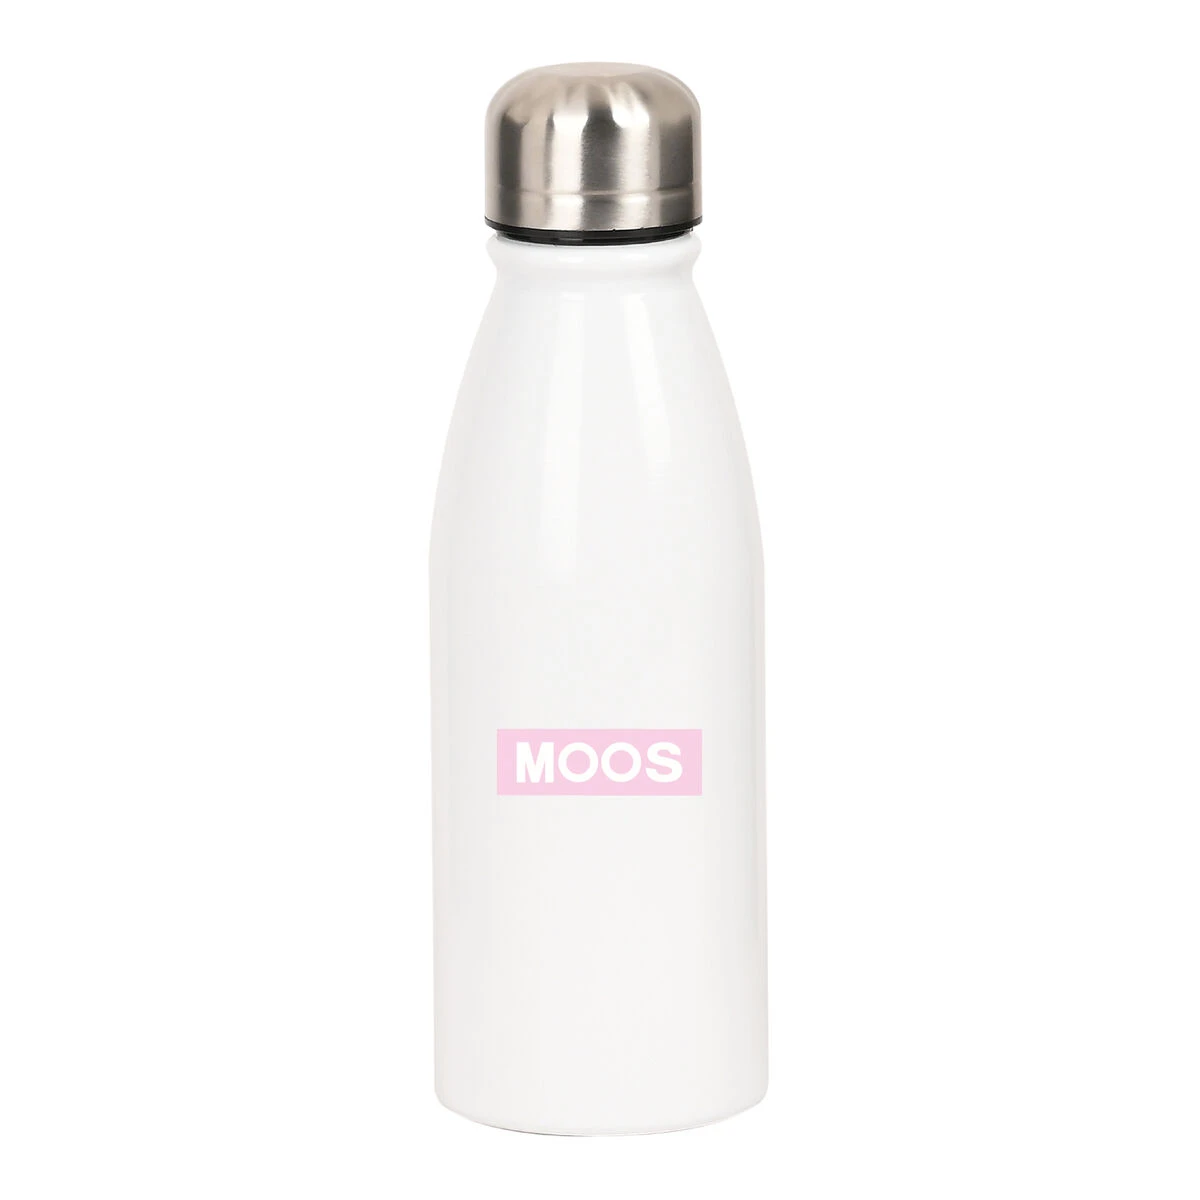 White insulated bottle with MOOS branding.